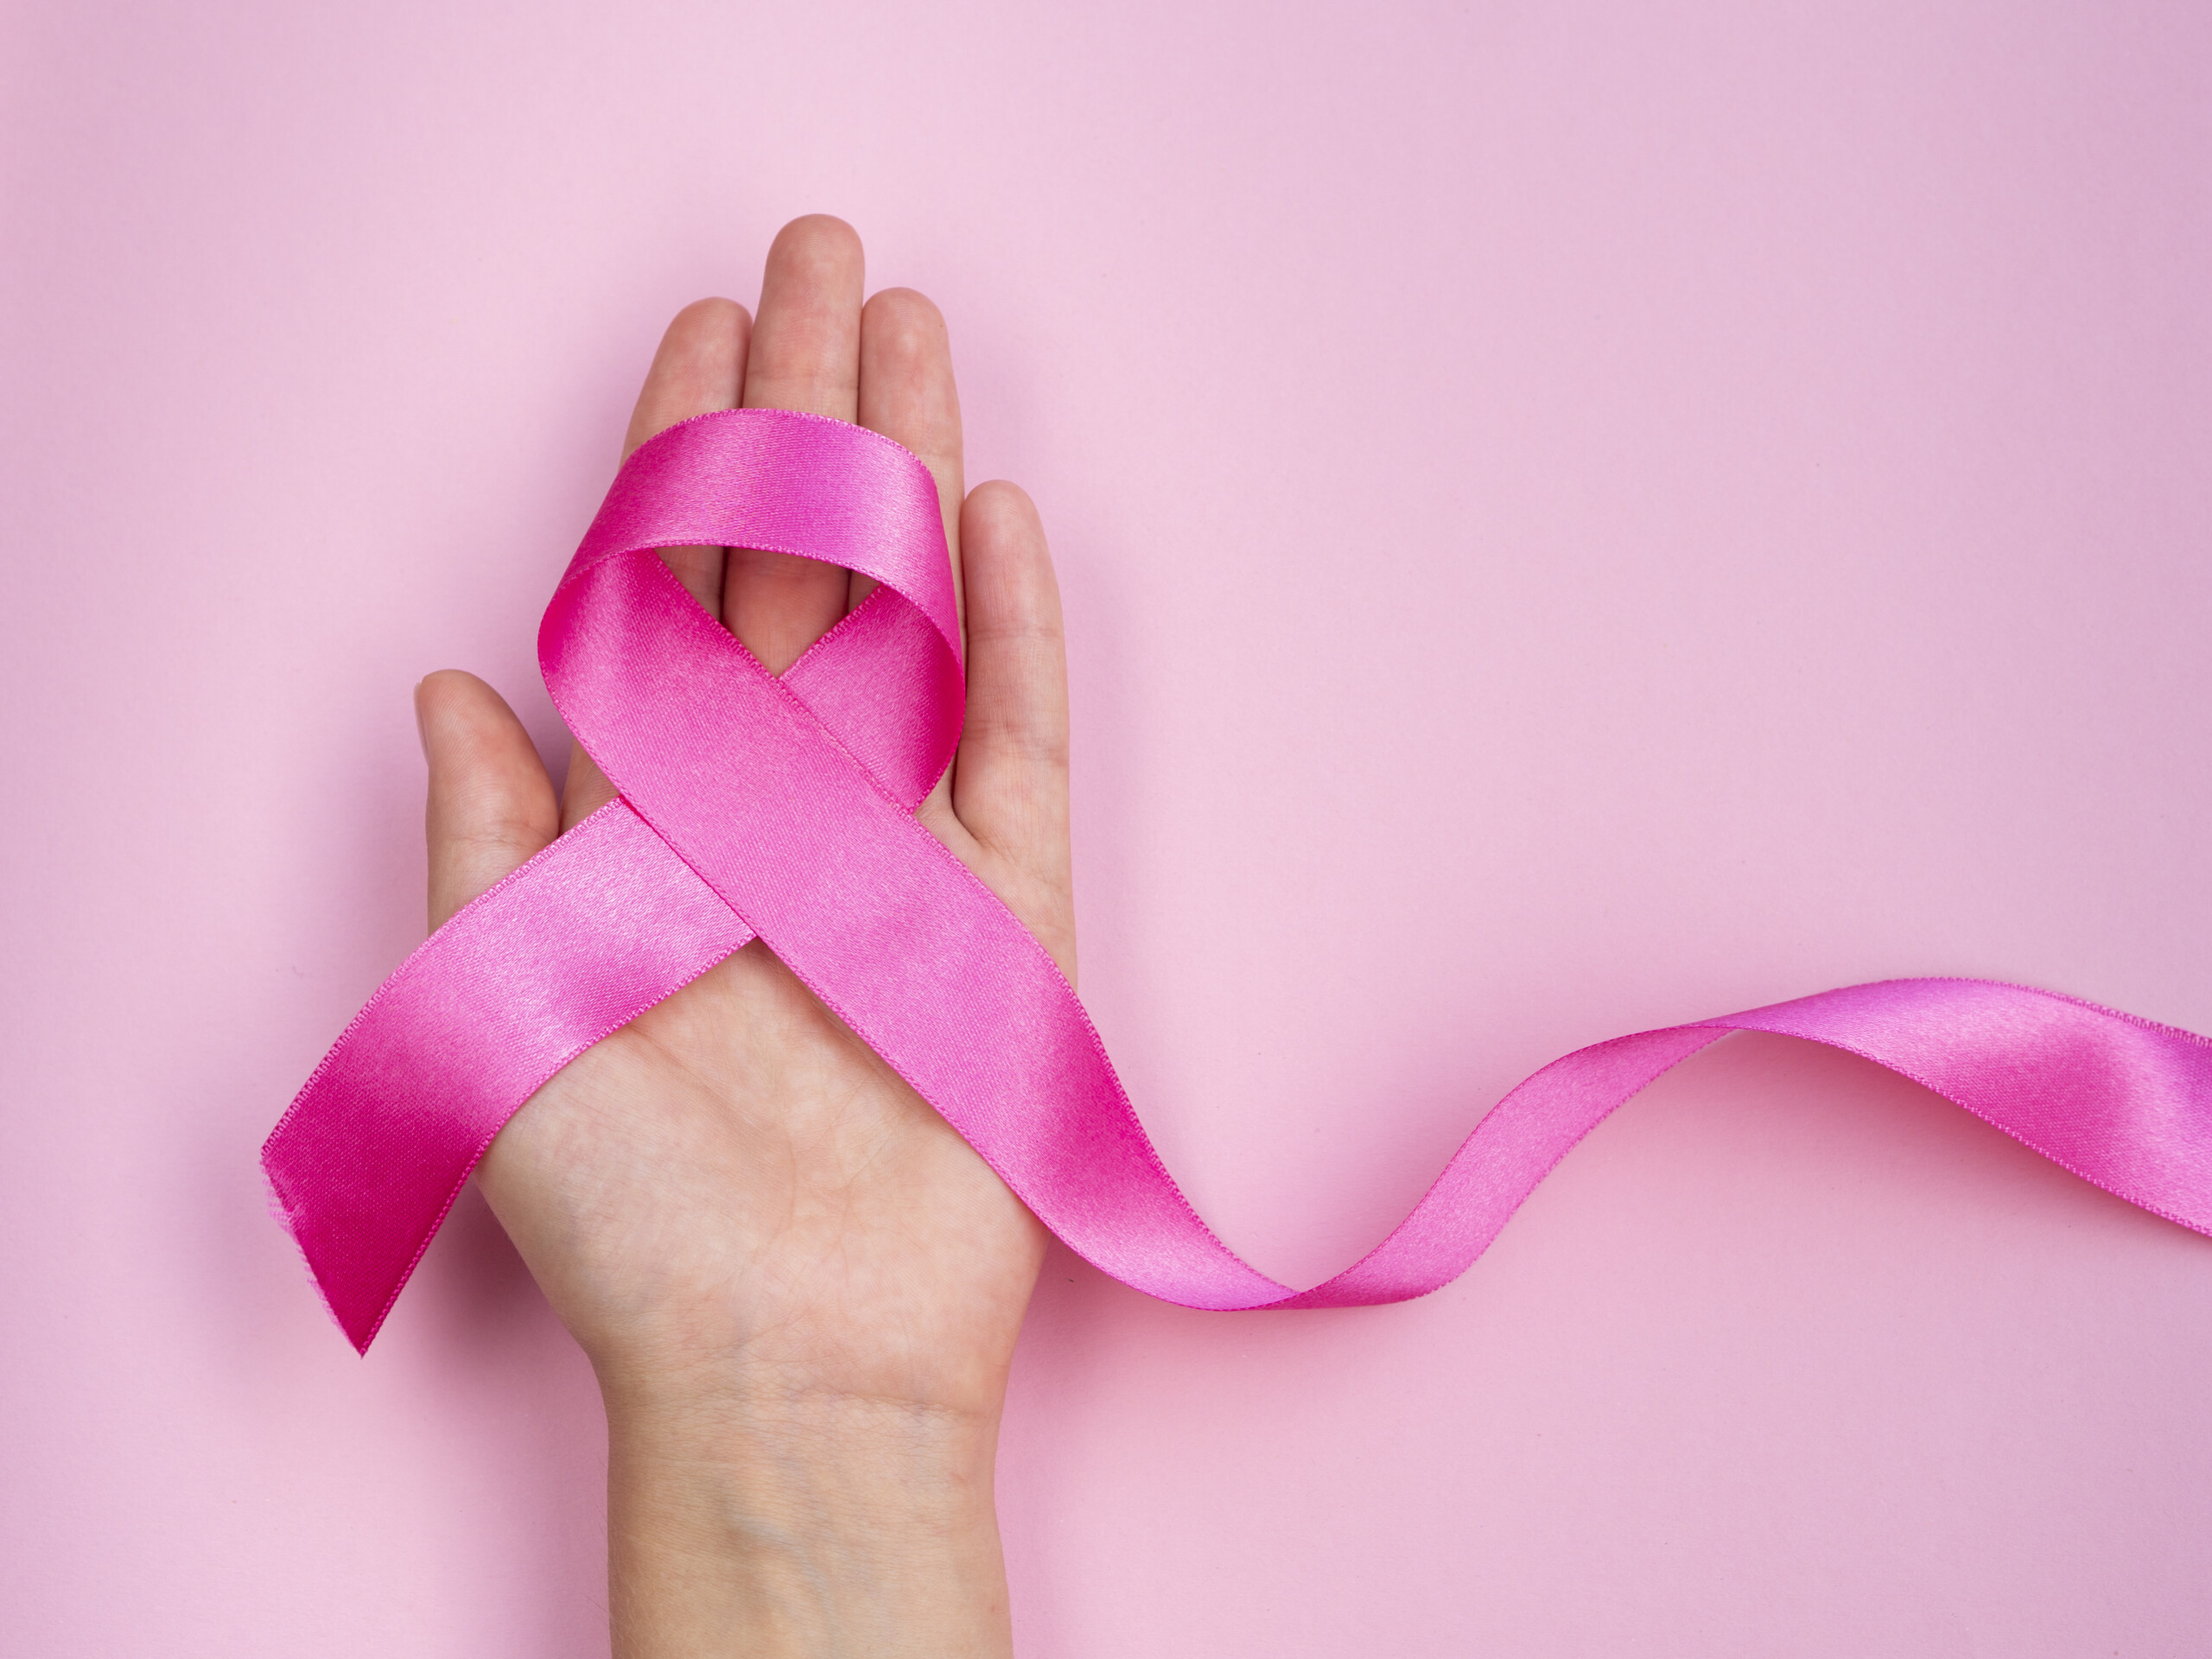 What Does a Preventive Double Mastectomy Feel Like Same Day?